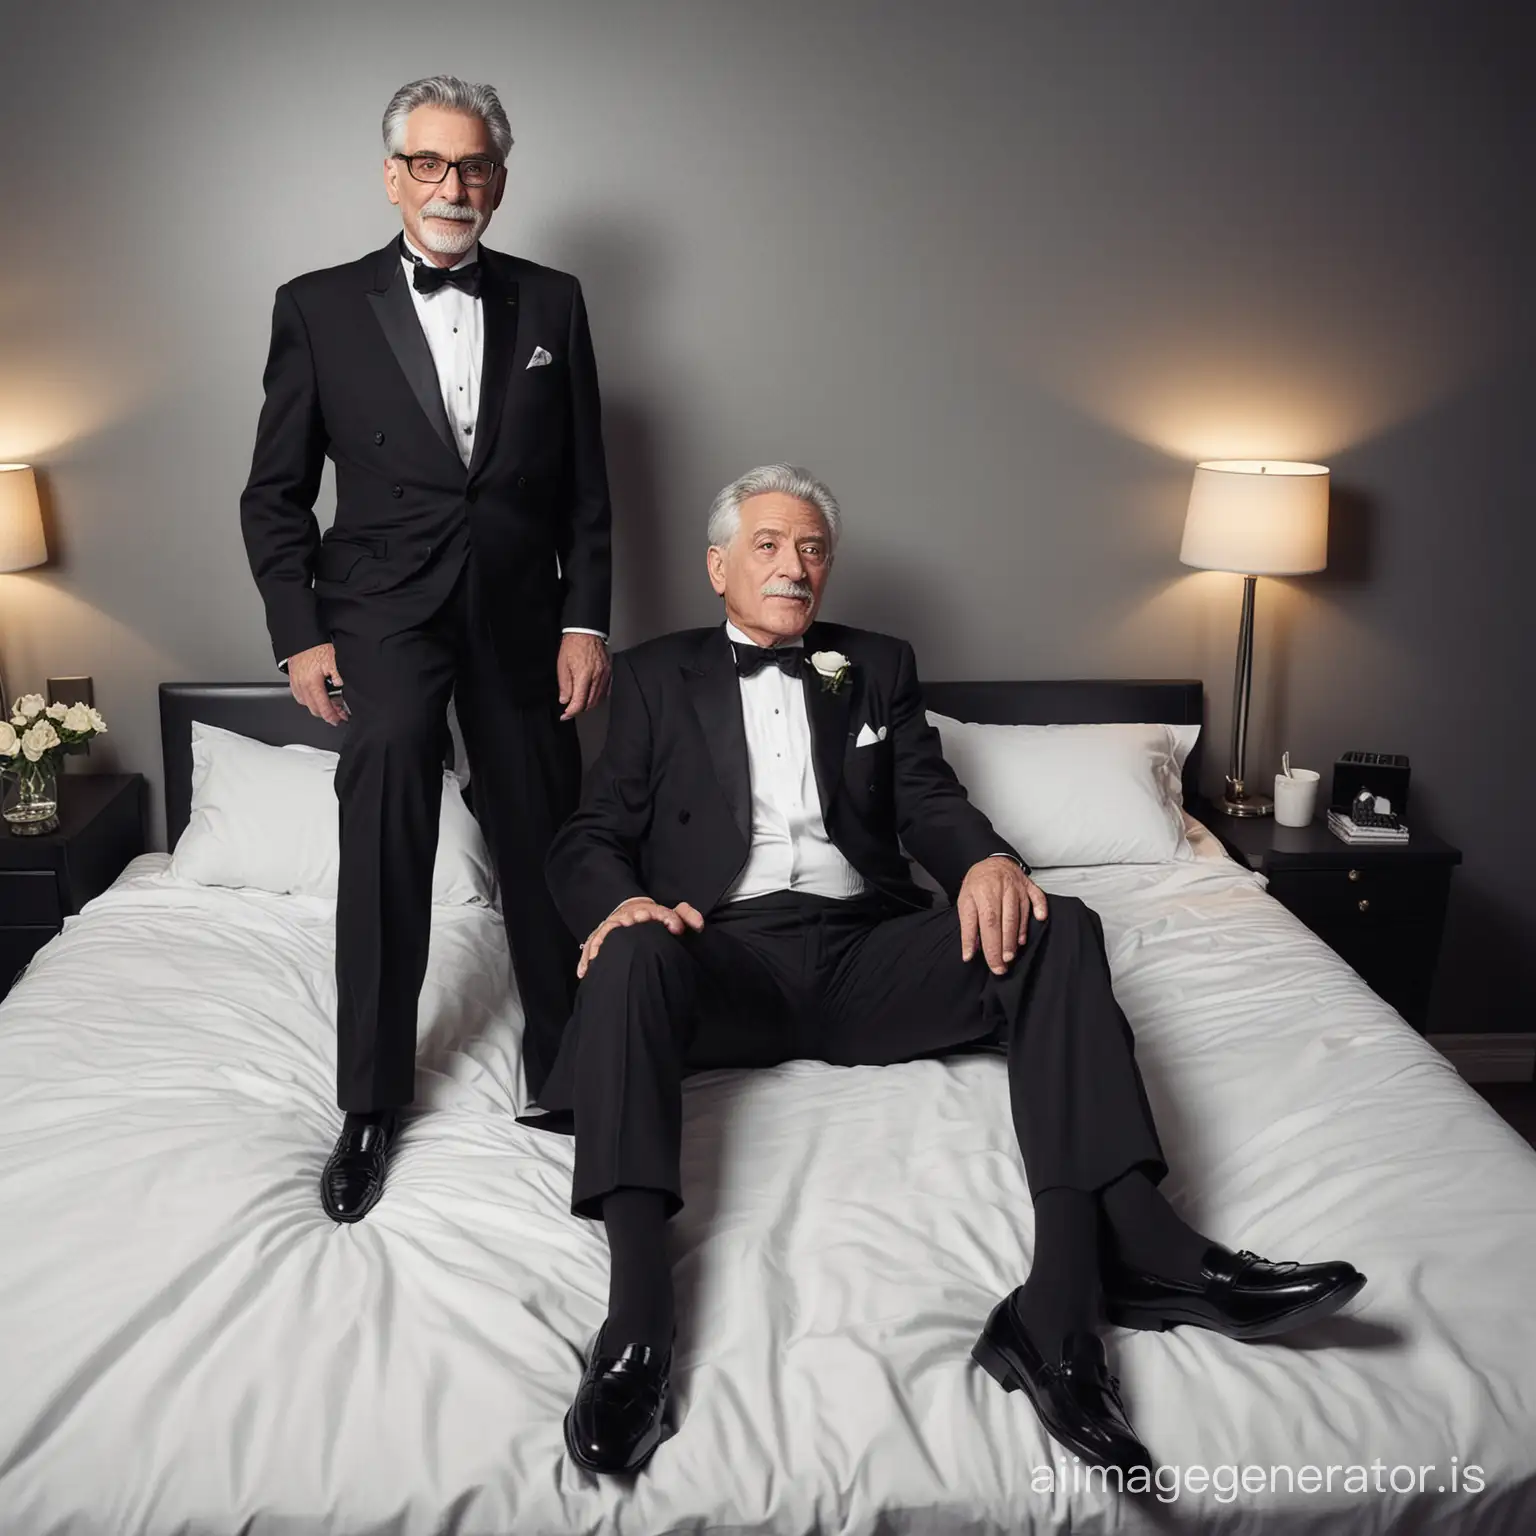 Elderly-Gentlemen-in-Tuxedos-Sharing-an-Embarrassing-Moment-on-Office-Bed